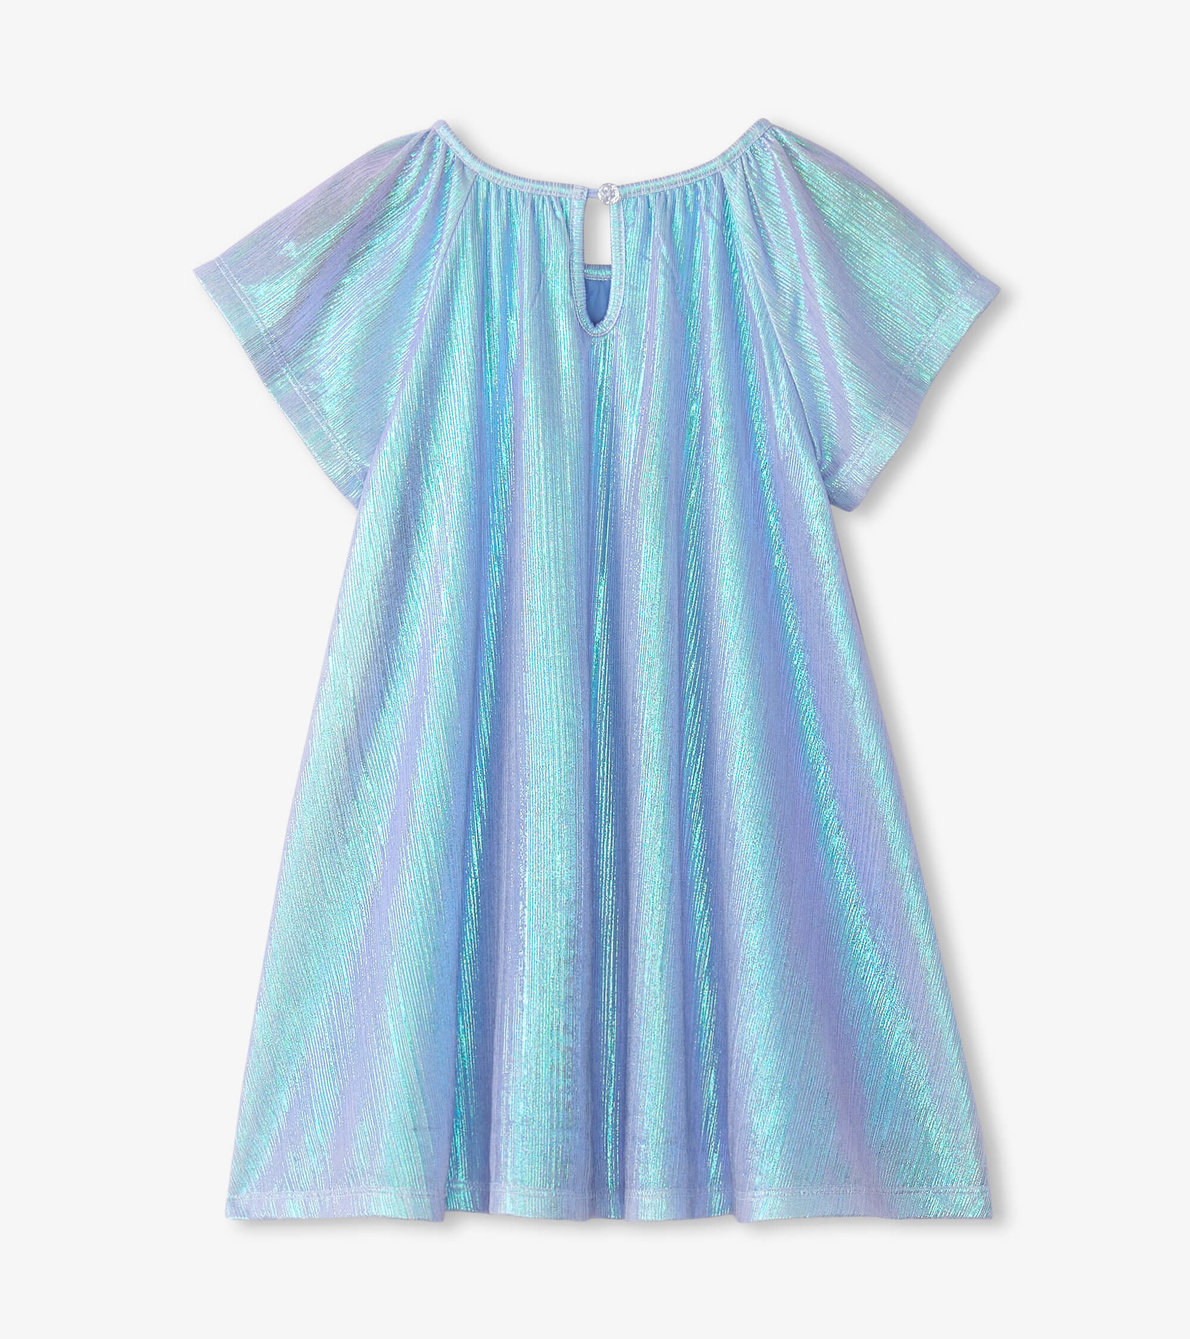 View larger image of Baby & Toddler Girls Silver Metallic A-Line Dress